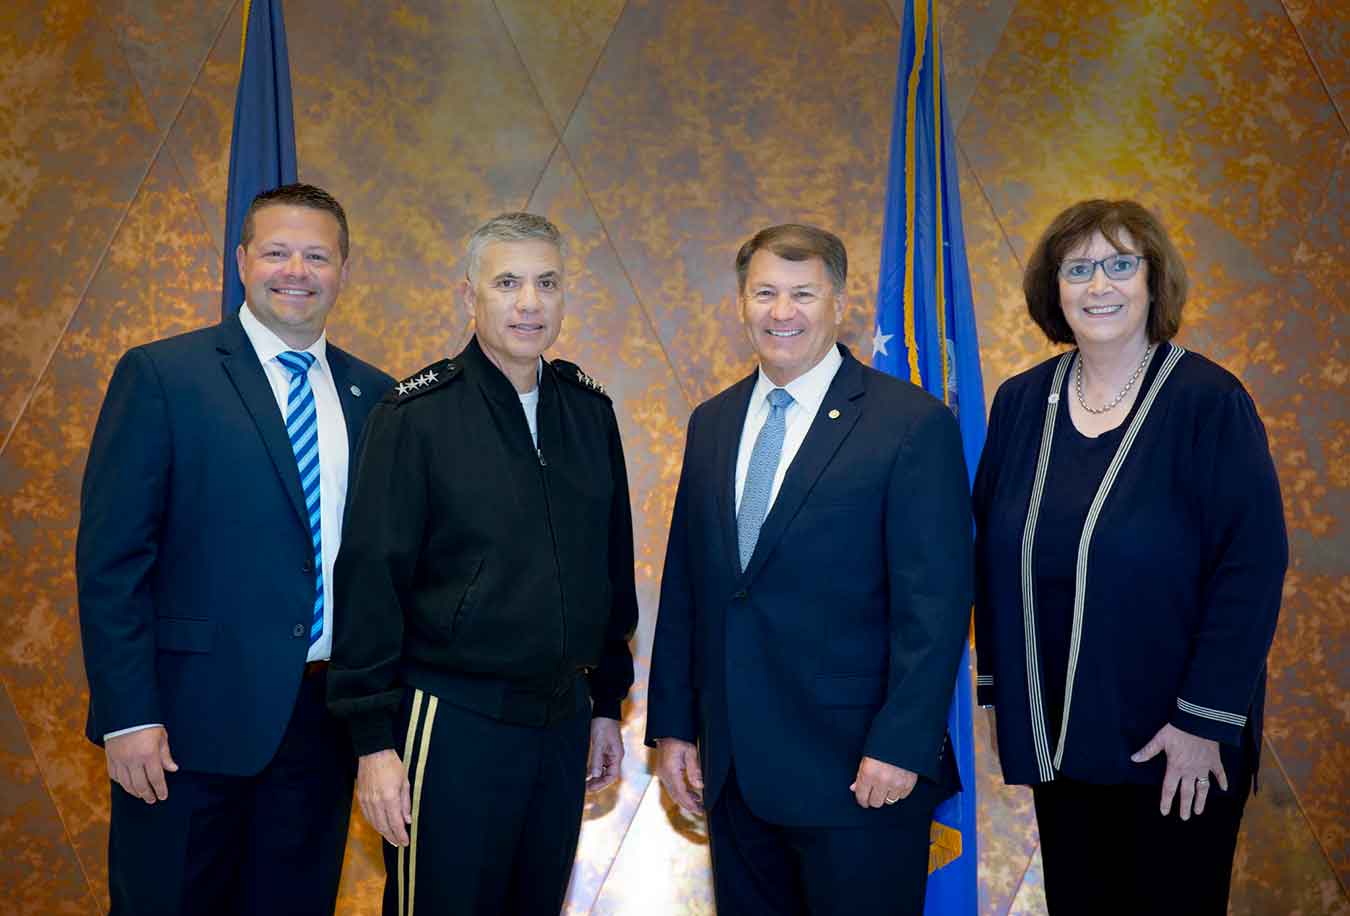 From left to right: DSU Applied Research Lab Director Dr. Josh Pauli, Gen. Paul M. Nakasone, Commander, U.S. Cyber Command and Director, National Security Agency/Chief, Central Security Service, Sen. Mike Rounds, and DSU President Dr. José-Marie Griffiths.